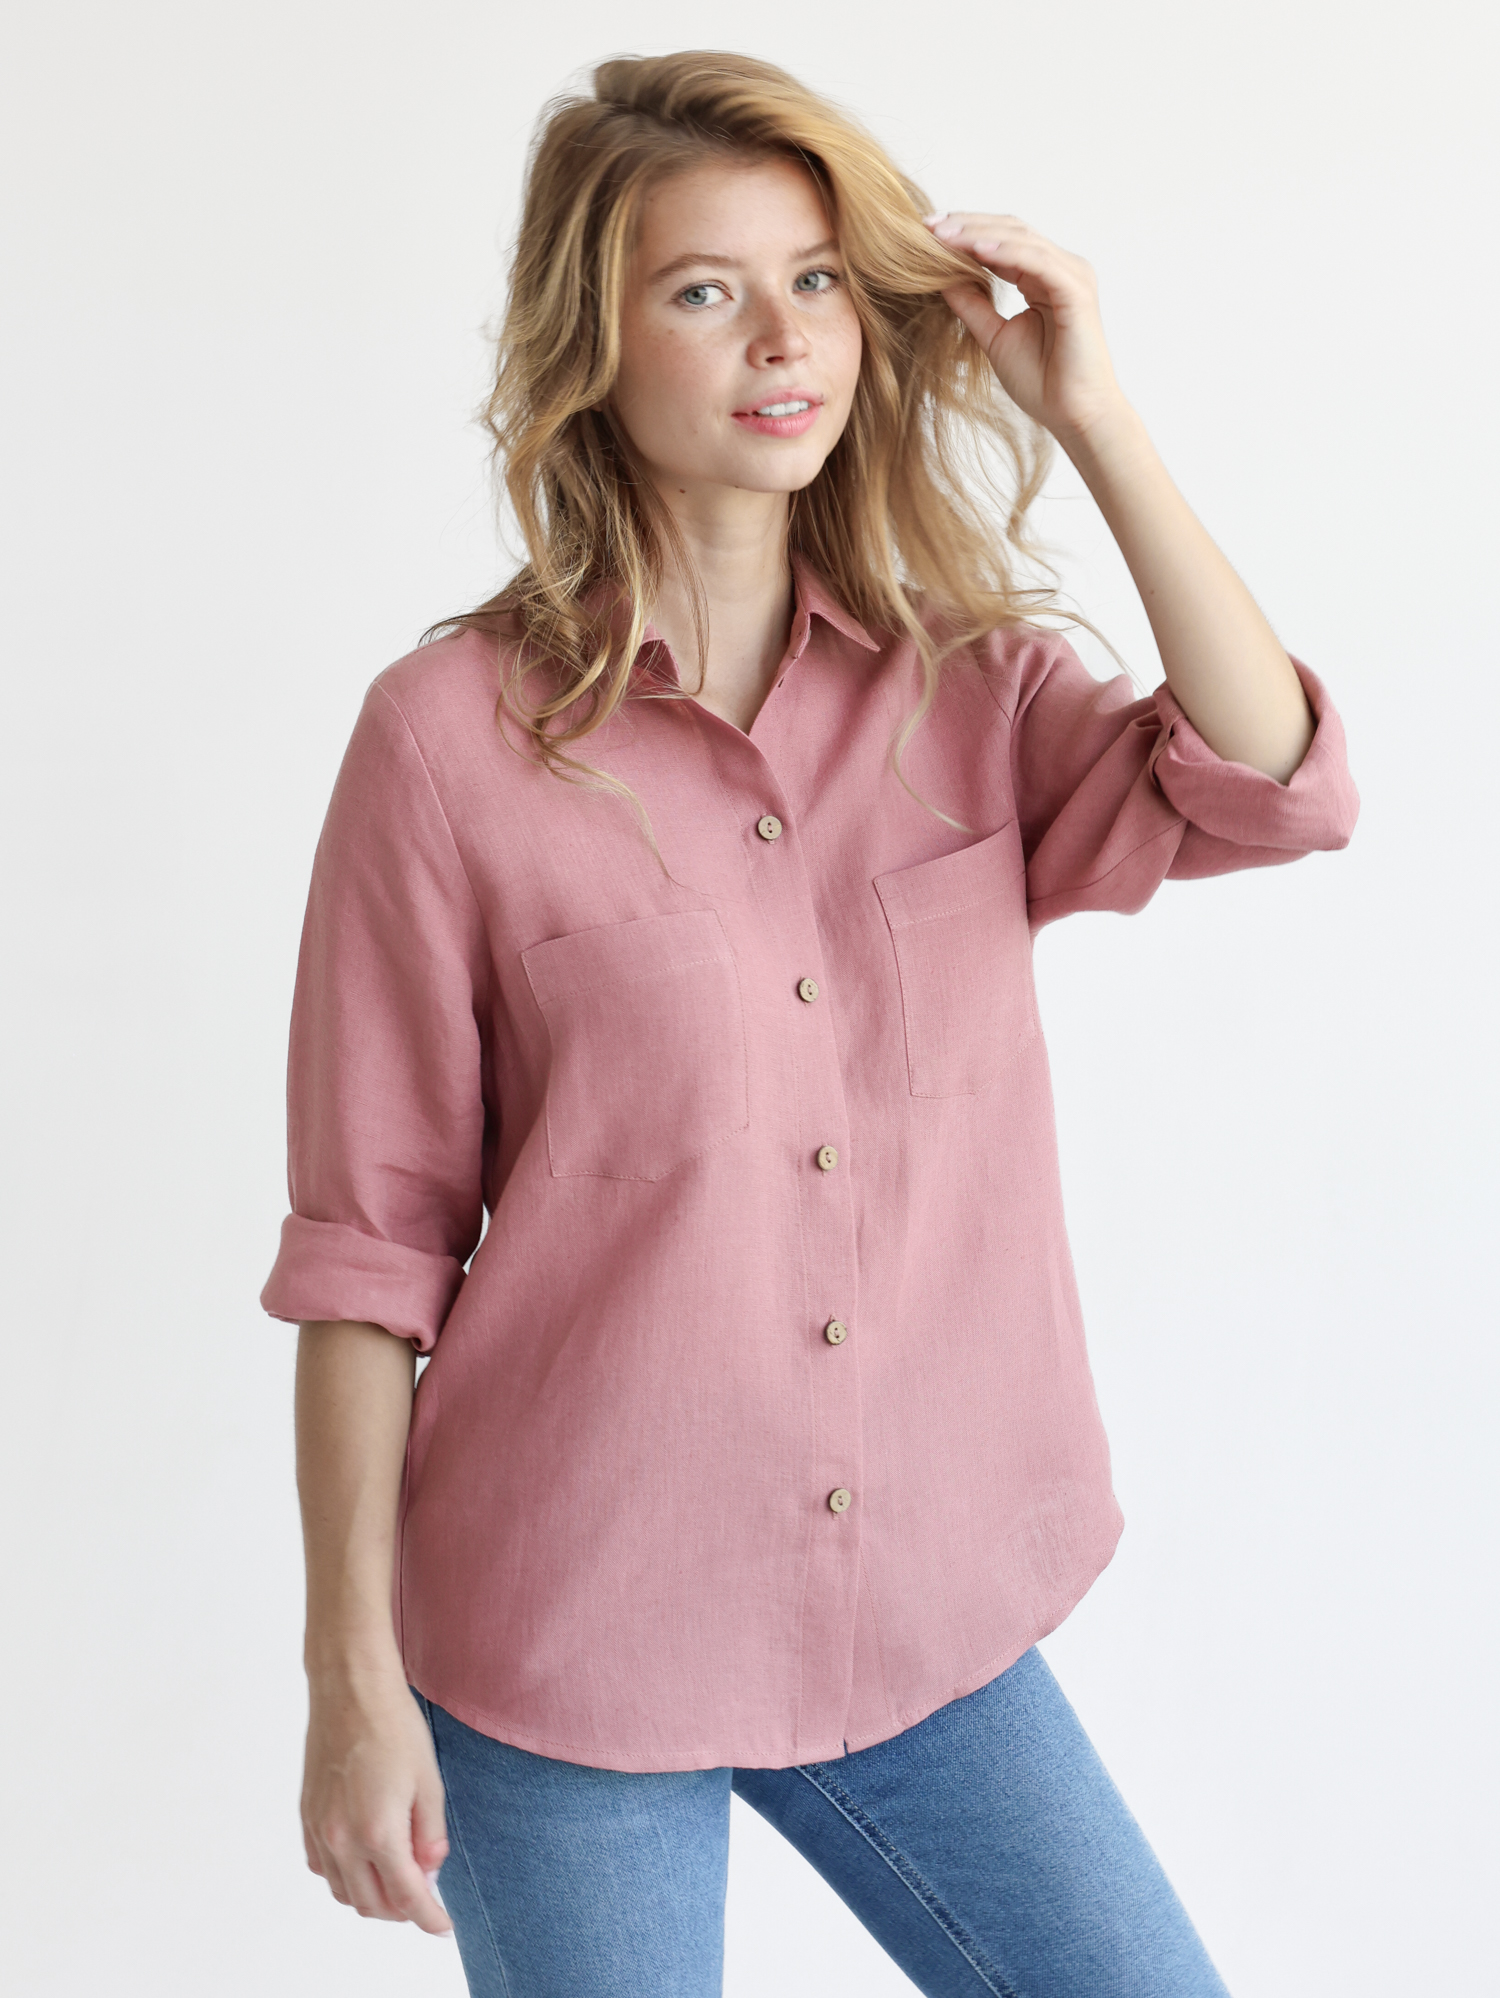 Stonewashed Linen Women Shirt - pure 100% linen flax dusty role light pink  with mother perl buttons pre-washed laundered Europe European linen lint  free relaxed cut shirt button down long sleeve shirt –